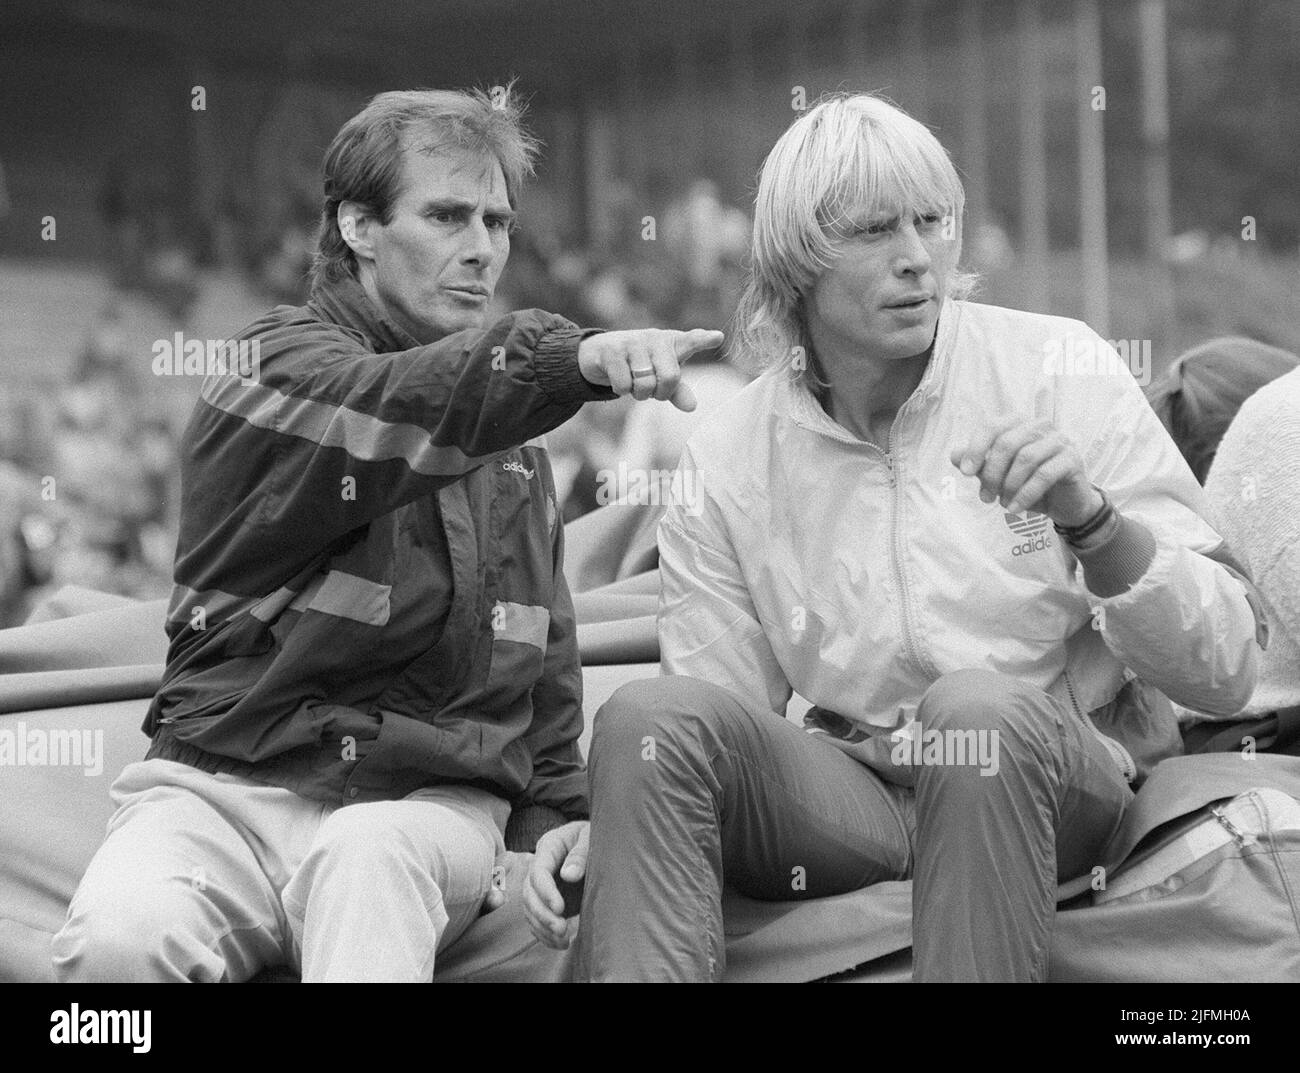 ARCHIVE PHOTO: Carlo THRAENHARDT will be 65 years old on July 5, 2022, Carlo THRAENHARDT (right), Germany, high jumper, high jump, in conversation with coach Gerd OSENBERG, sitting on a jumping mat, at the German Team Championships in Athletics, June 11th, 1988, SW -Recording. Stock Photo